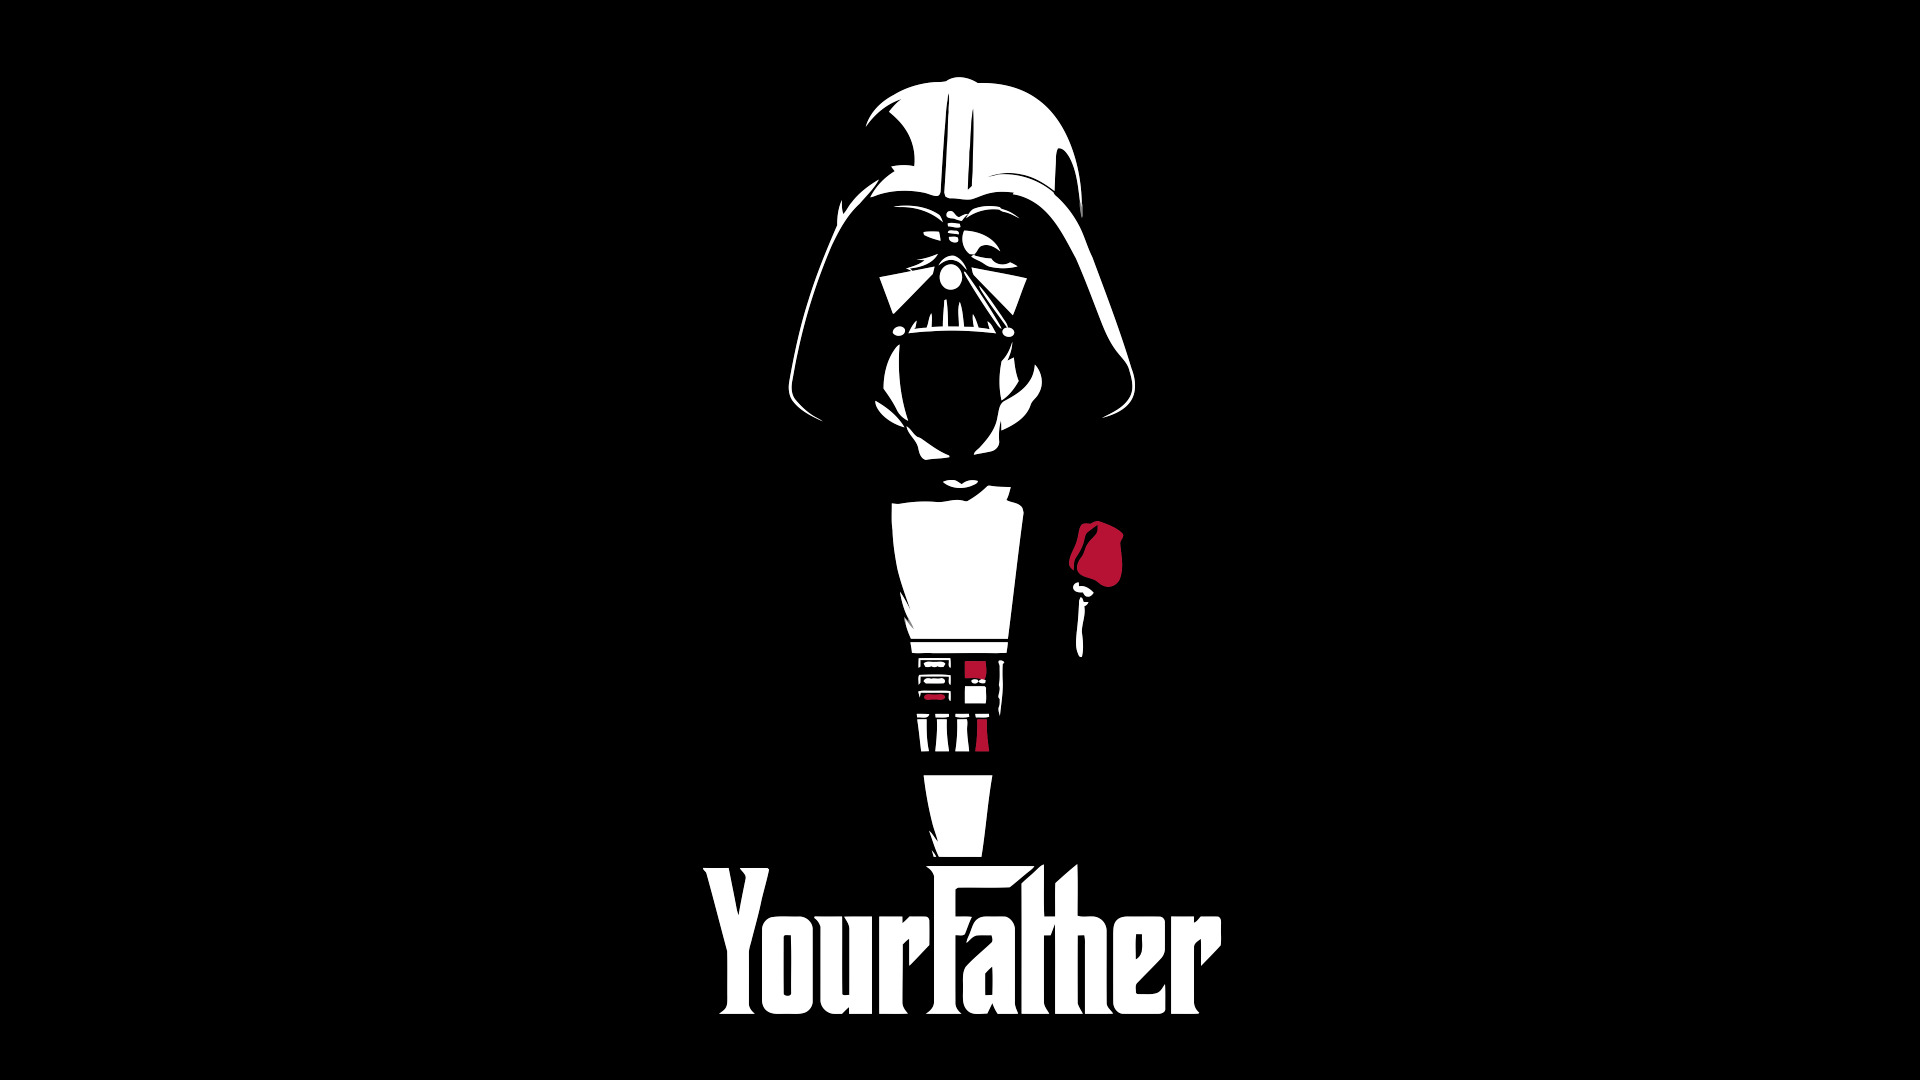 Darth Vader, The Godfather, Father, Star Wars Wallpapers HD / Desktop